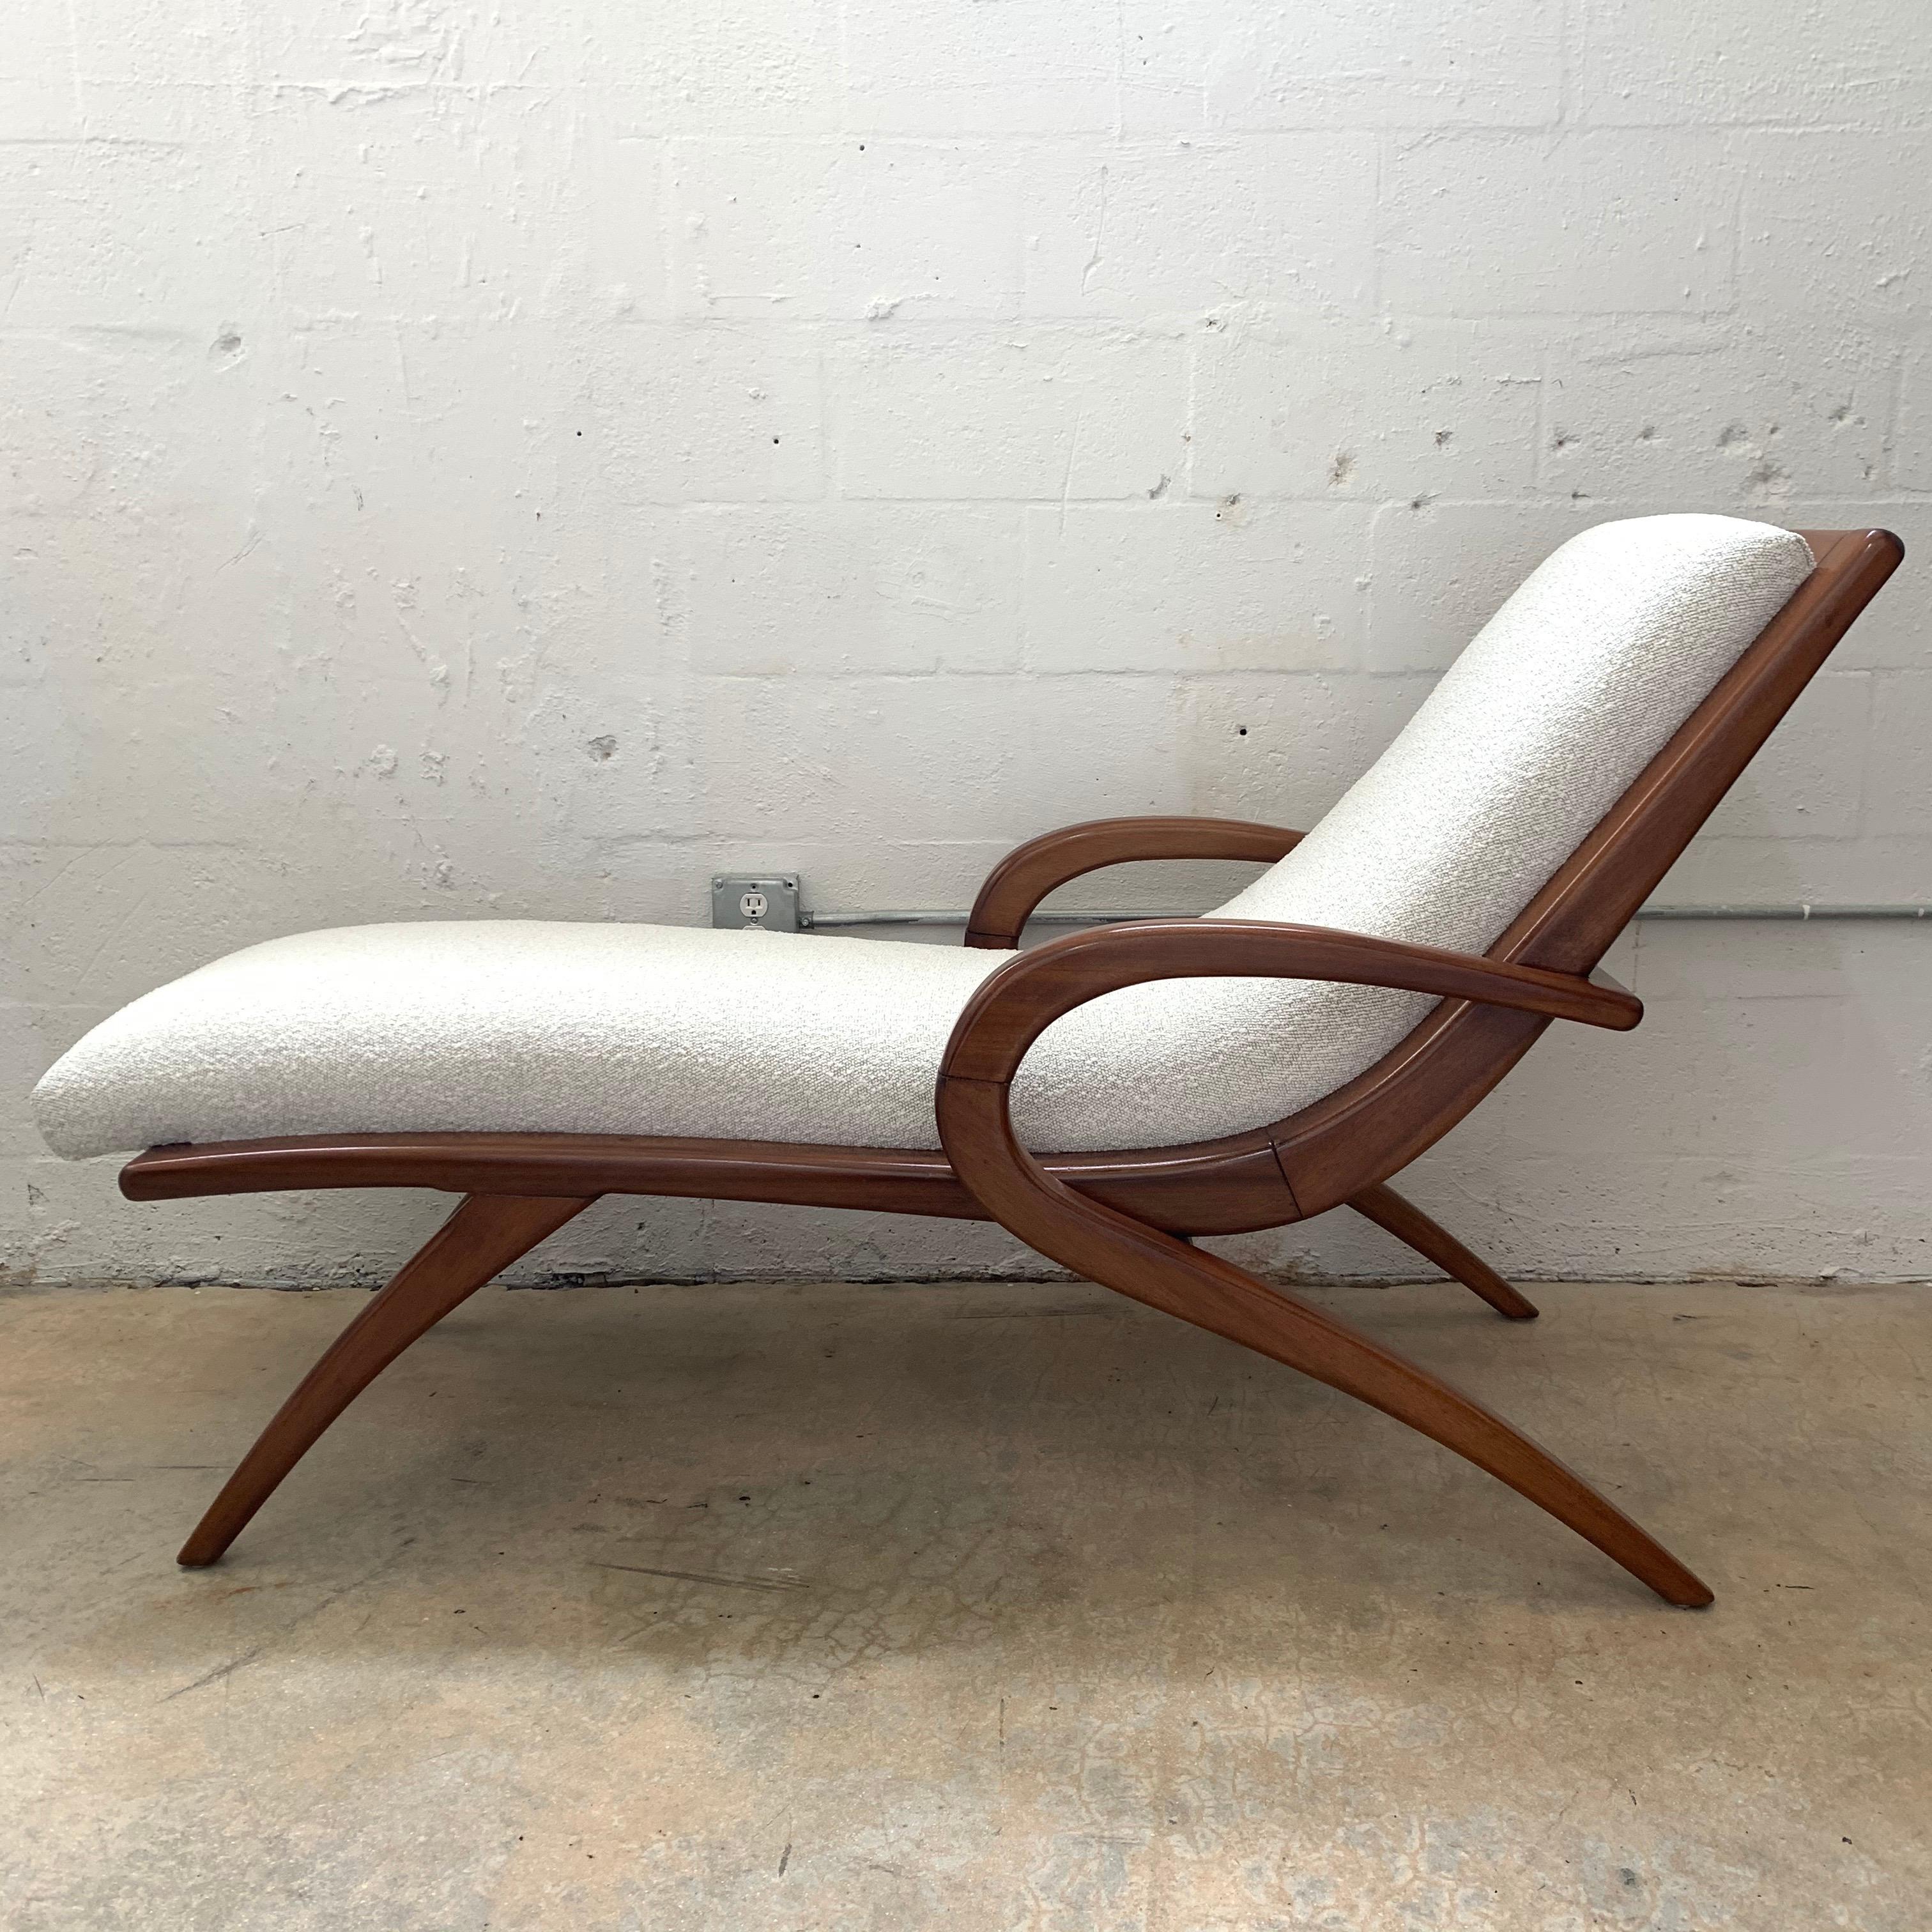 Sculptural midcentury chaise wave lounge rendered in a polished walnut frame with boucle upholstery, designed by Adrian Pearsall, USA, 1960s.

Style of Vladimir Kagan.